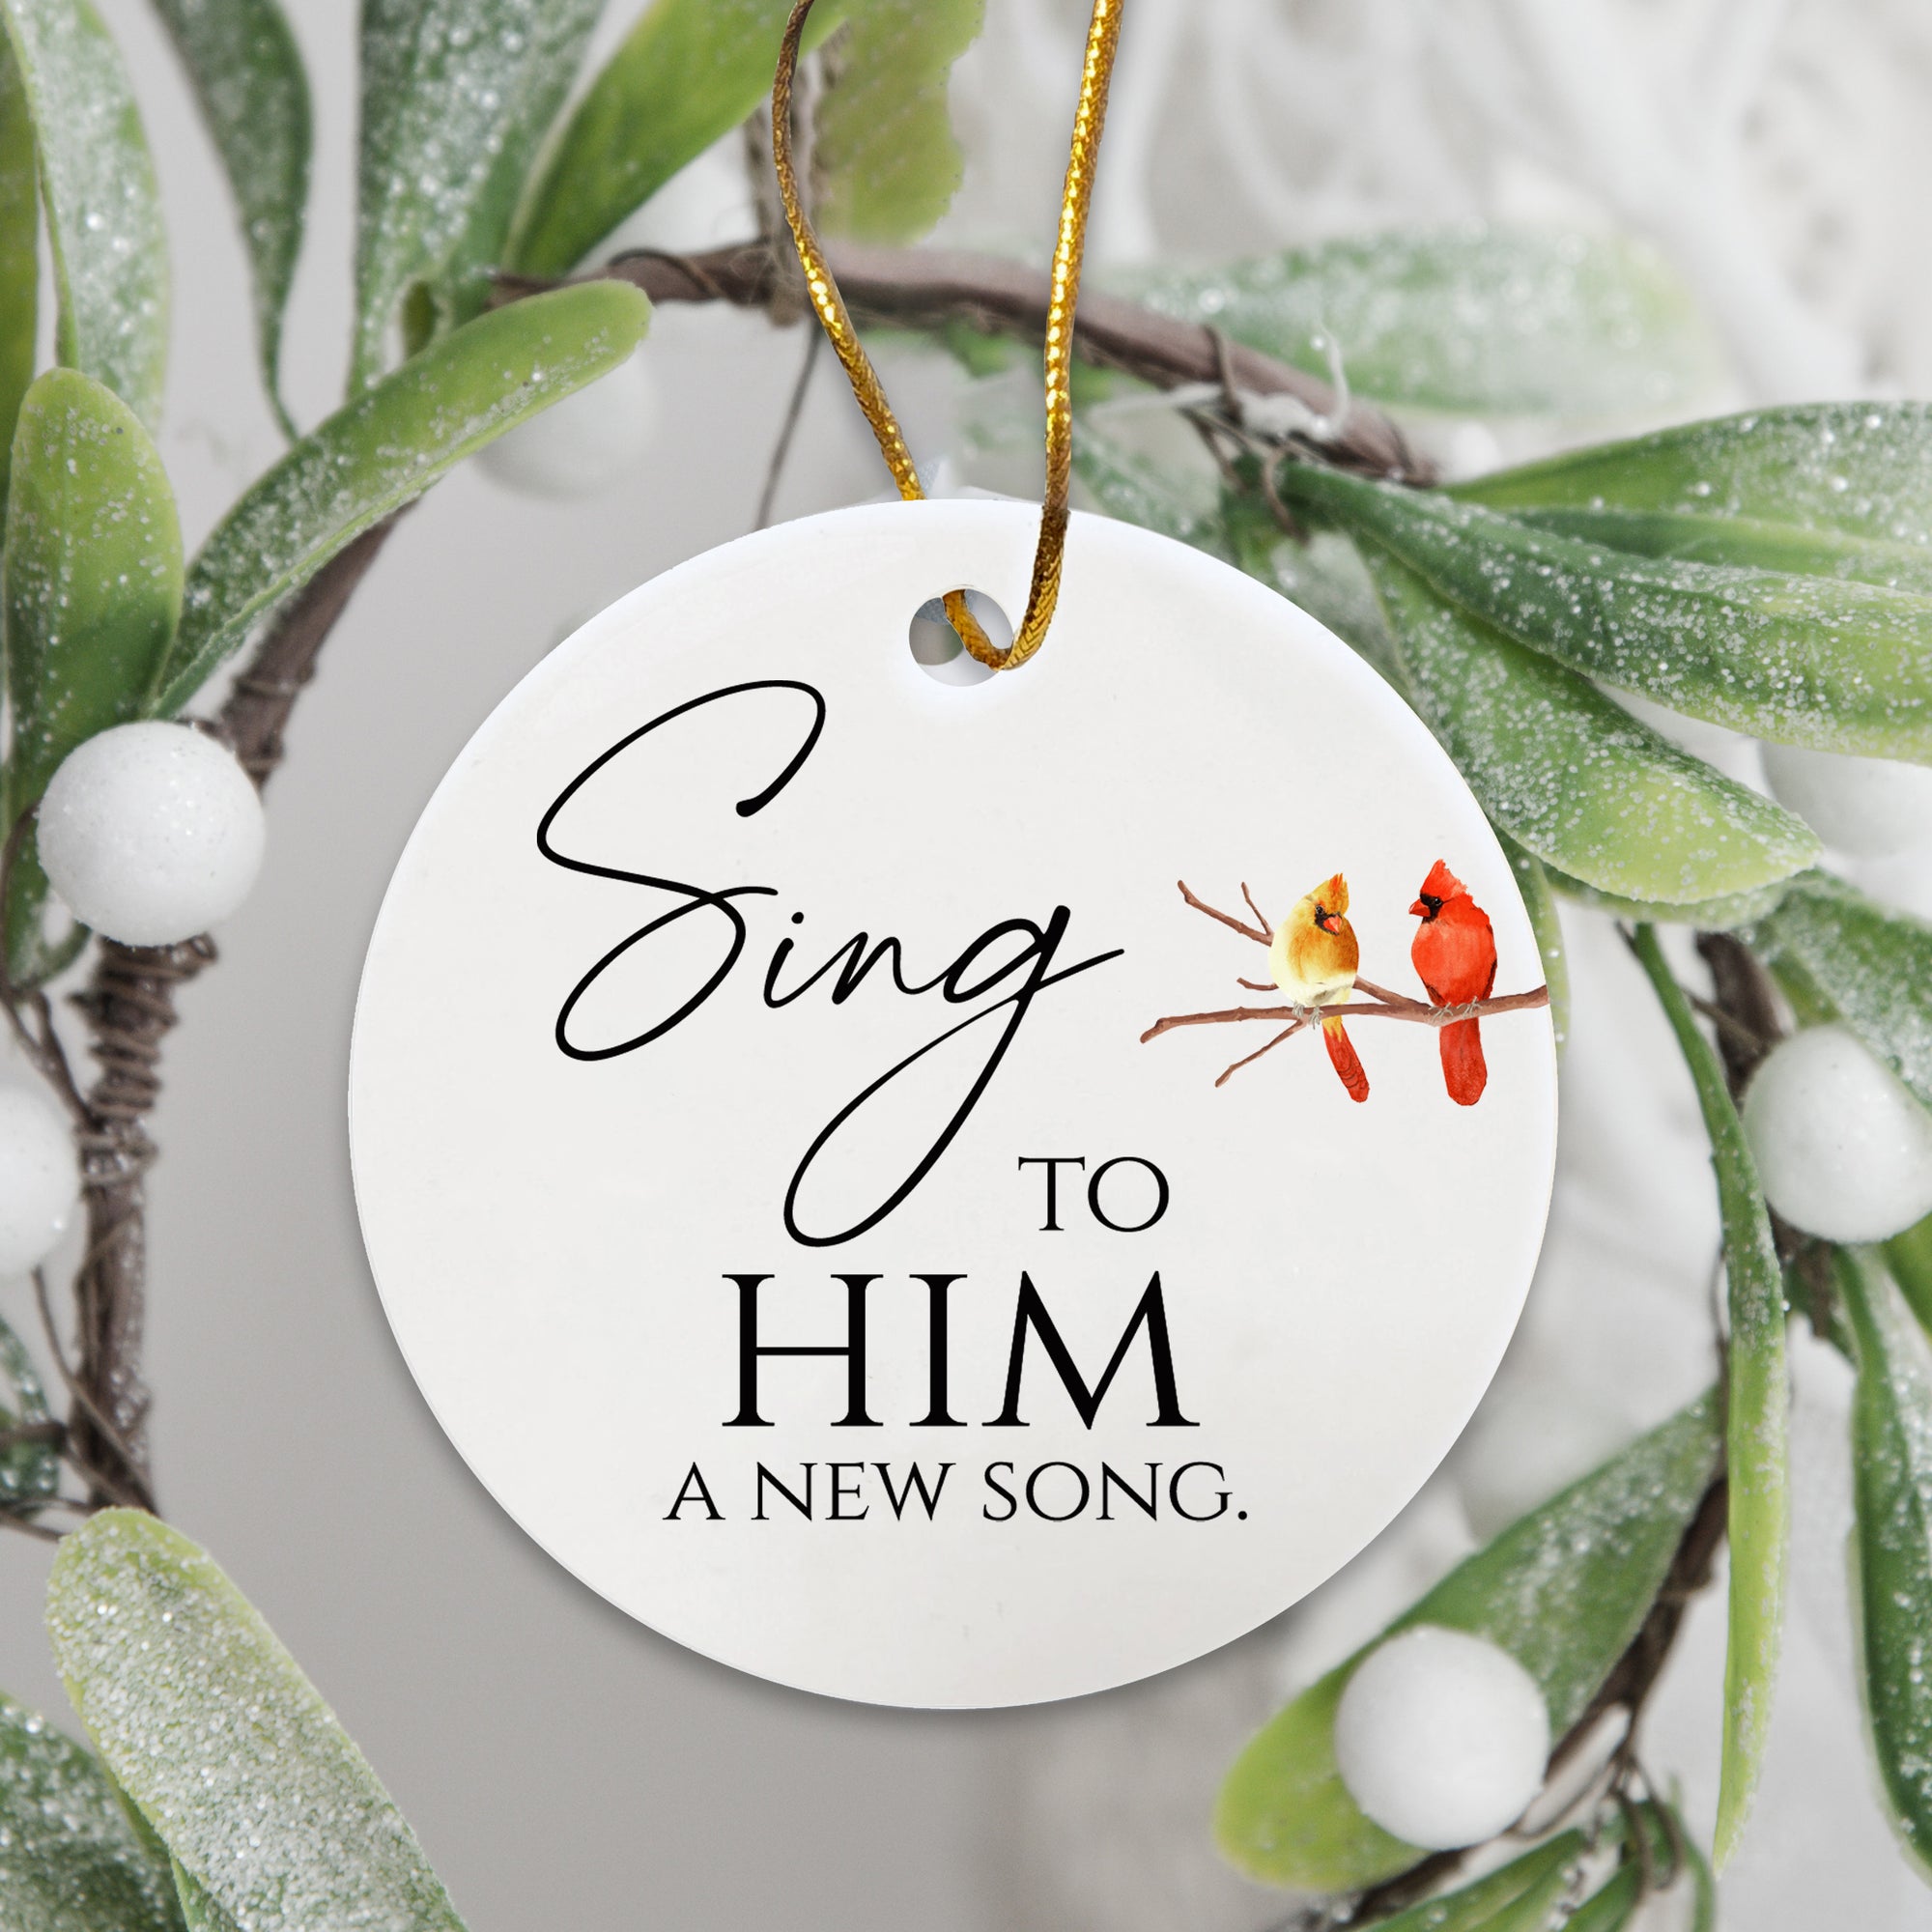 White Ceramic Cardinal Ornament With Everyday Verses Gift Ideas - Sing To Him